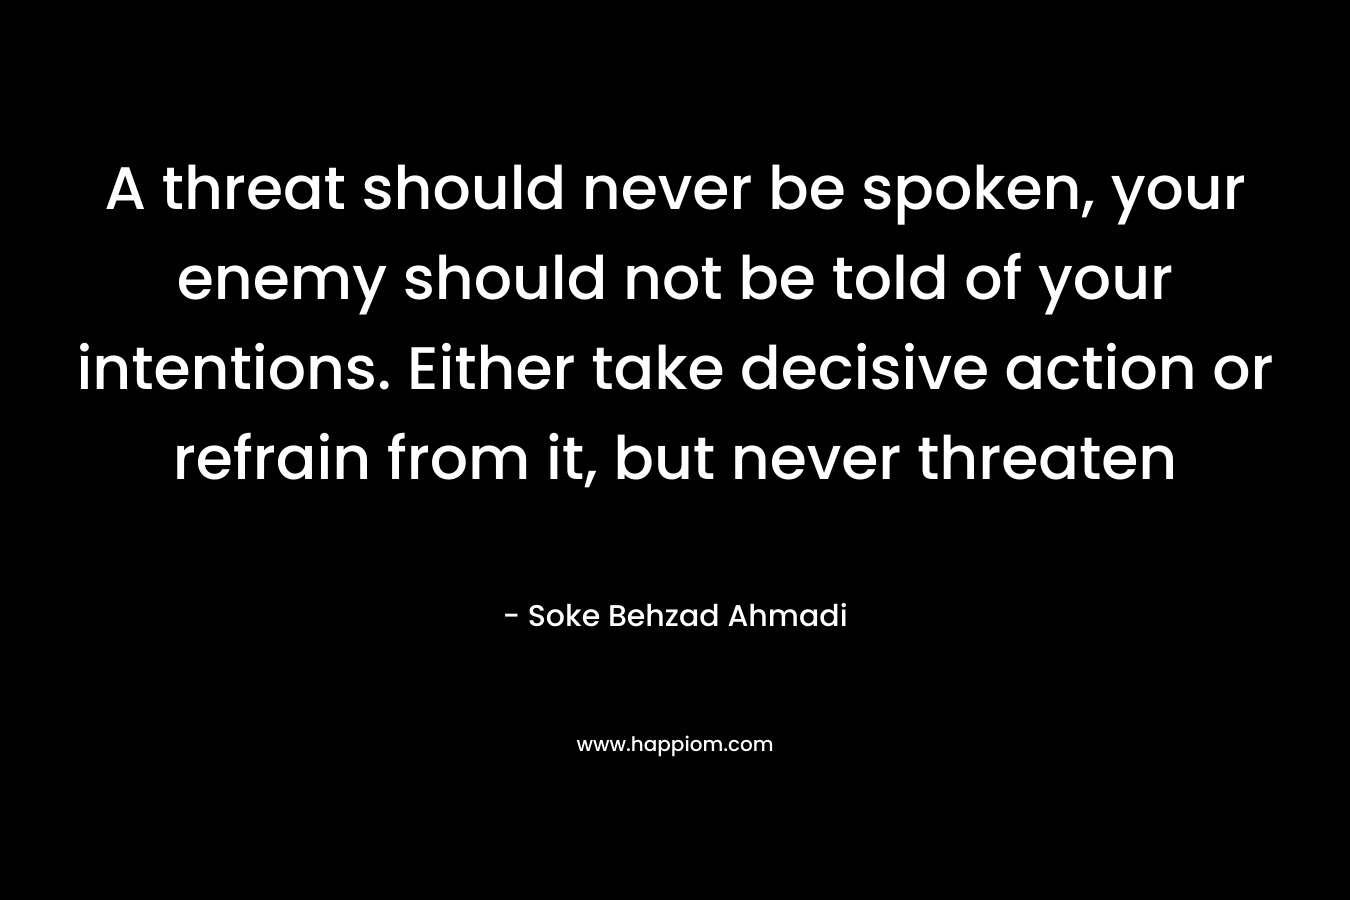 A threat should never be spoken, your enemy should not be told of your intentions. Either take decisive action or refrain from it, but never threaten